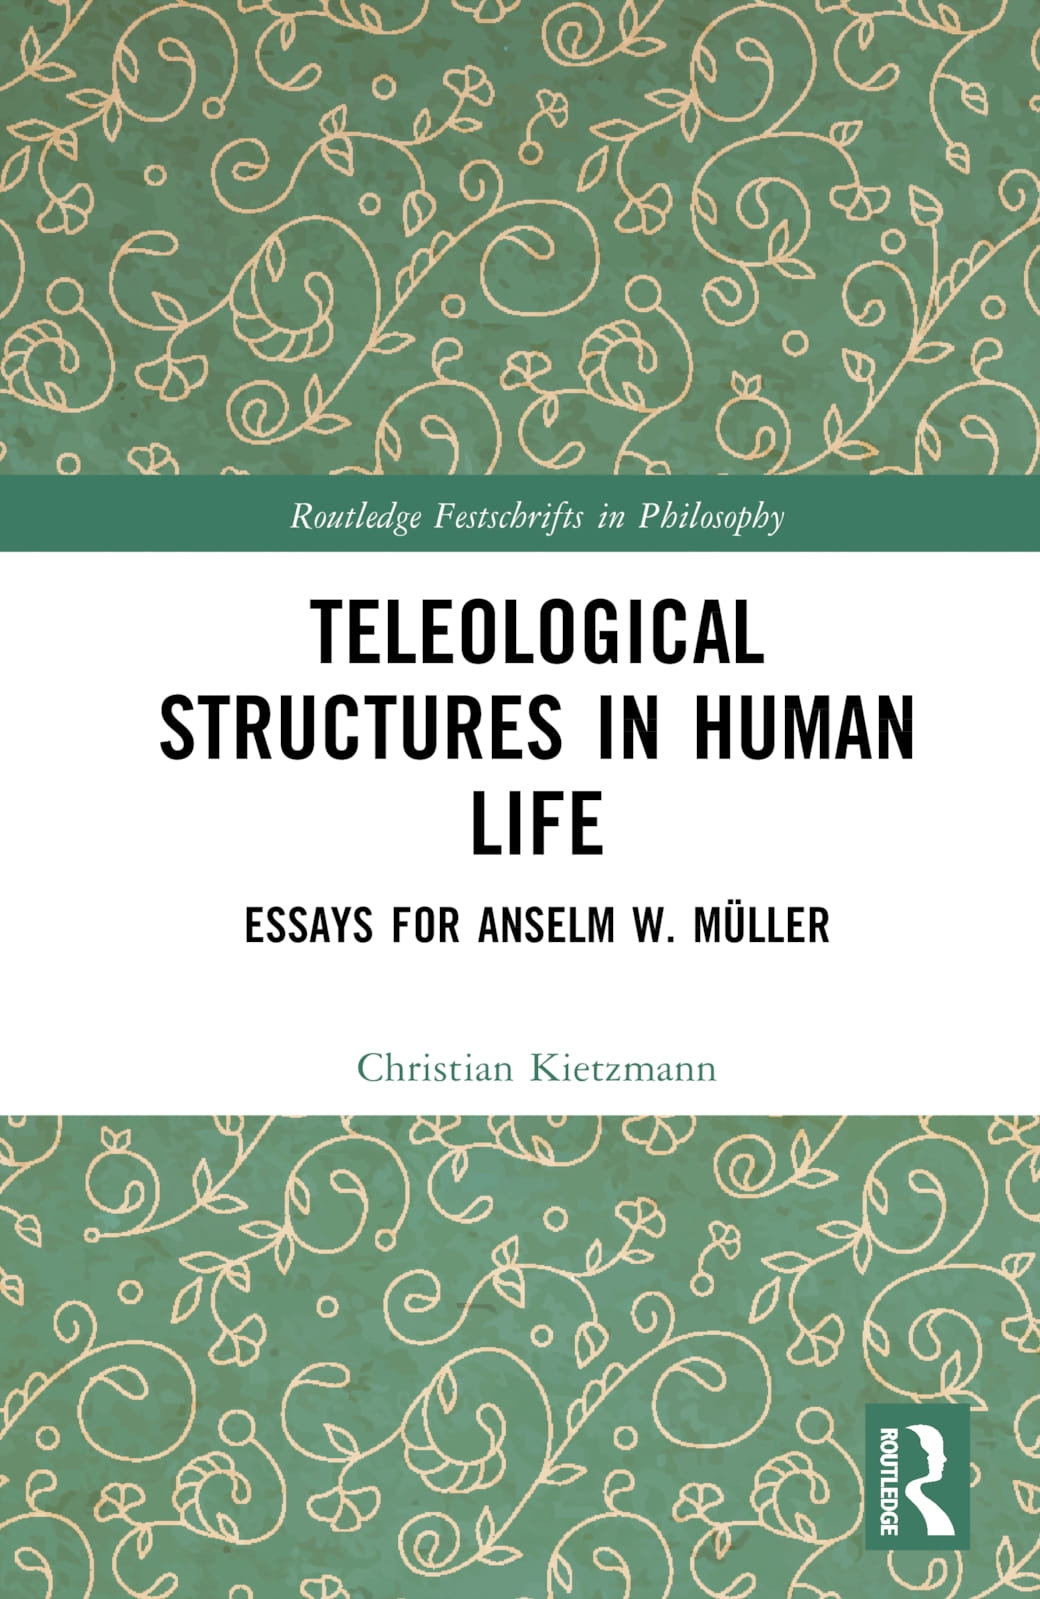 Teleological Structures in Human Life: Essays for Anselm W. Müller